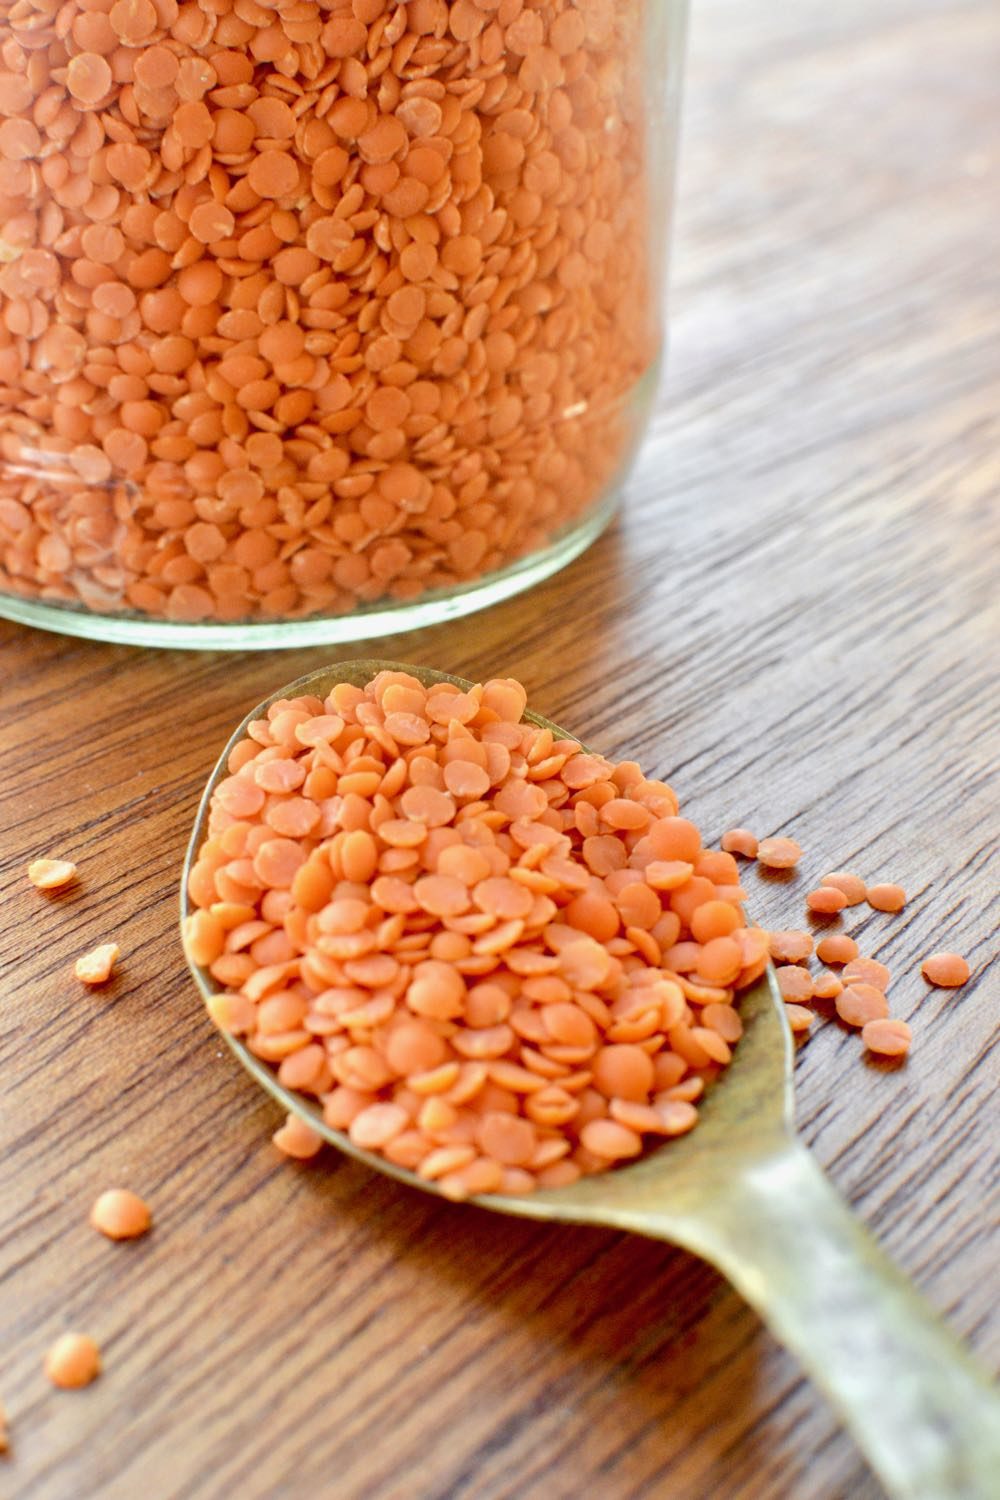 Red lentils on a spoon showing their pinkish orange colour and disc shape